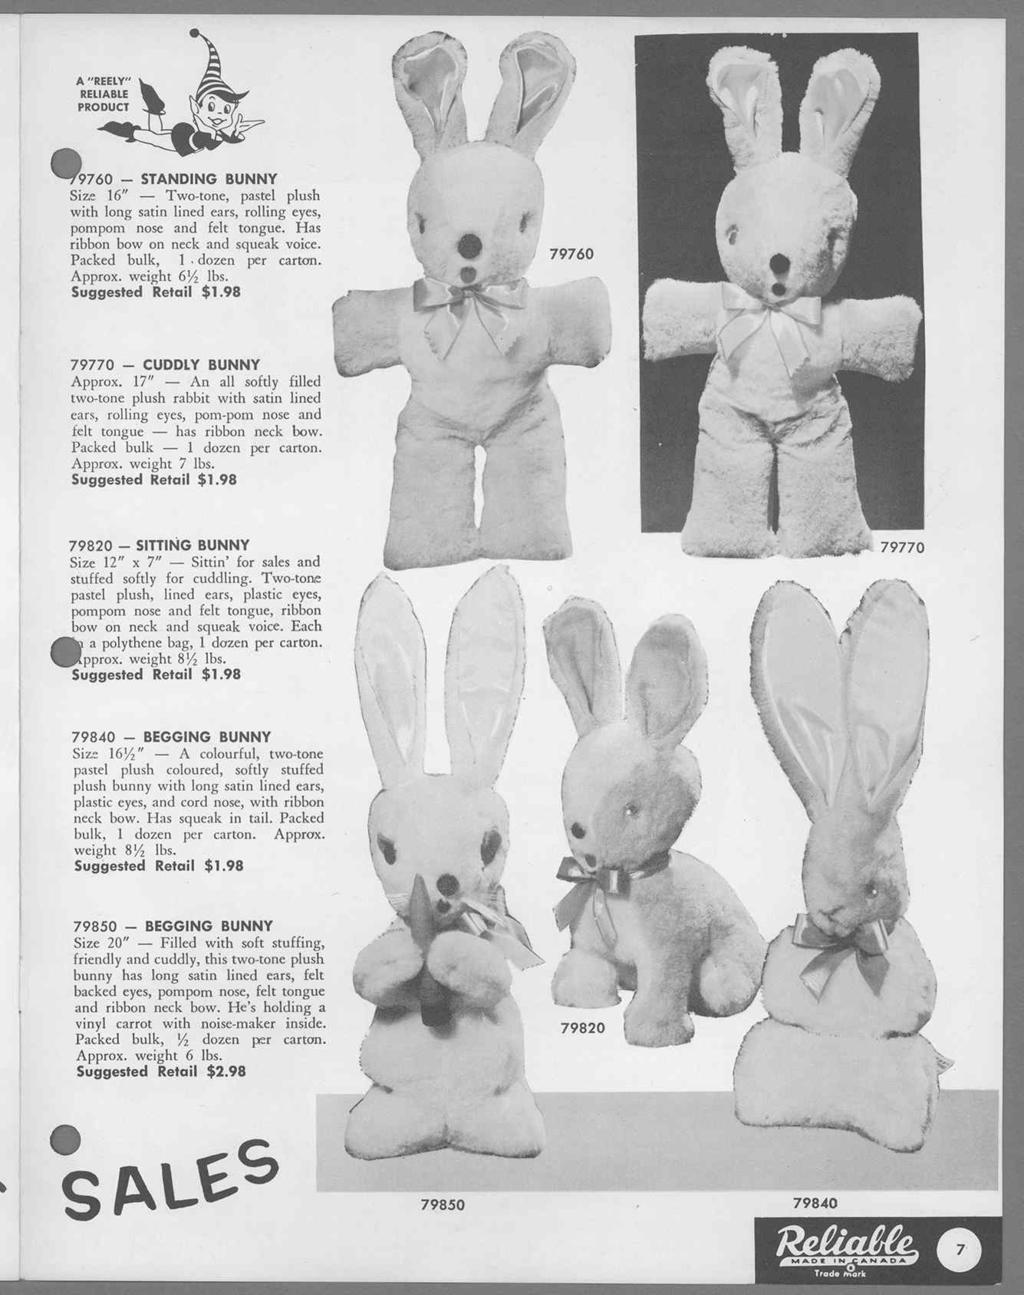 A "REELY".9760 STANDING BUNNY Size, 16" Two-tone, pastel plush with long satin lined ears, rolling eyes, pompom nose and felt tongue. Has ribbon bow on neck and squeak voice. Packed bulk, 1.